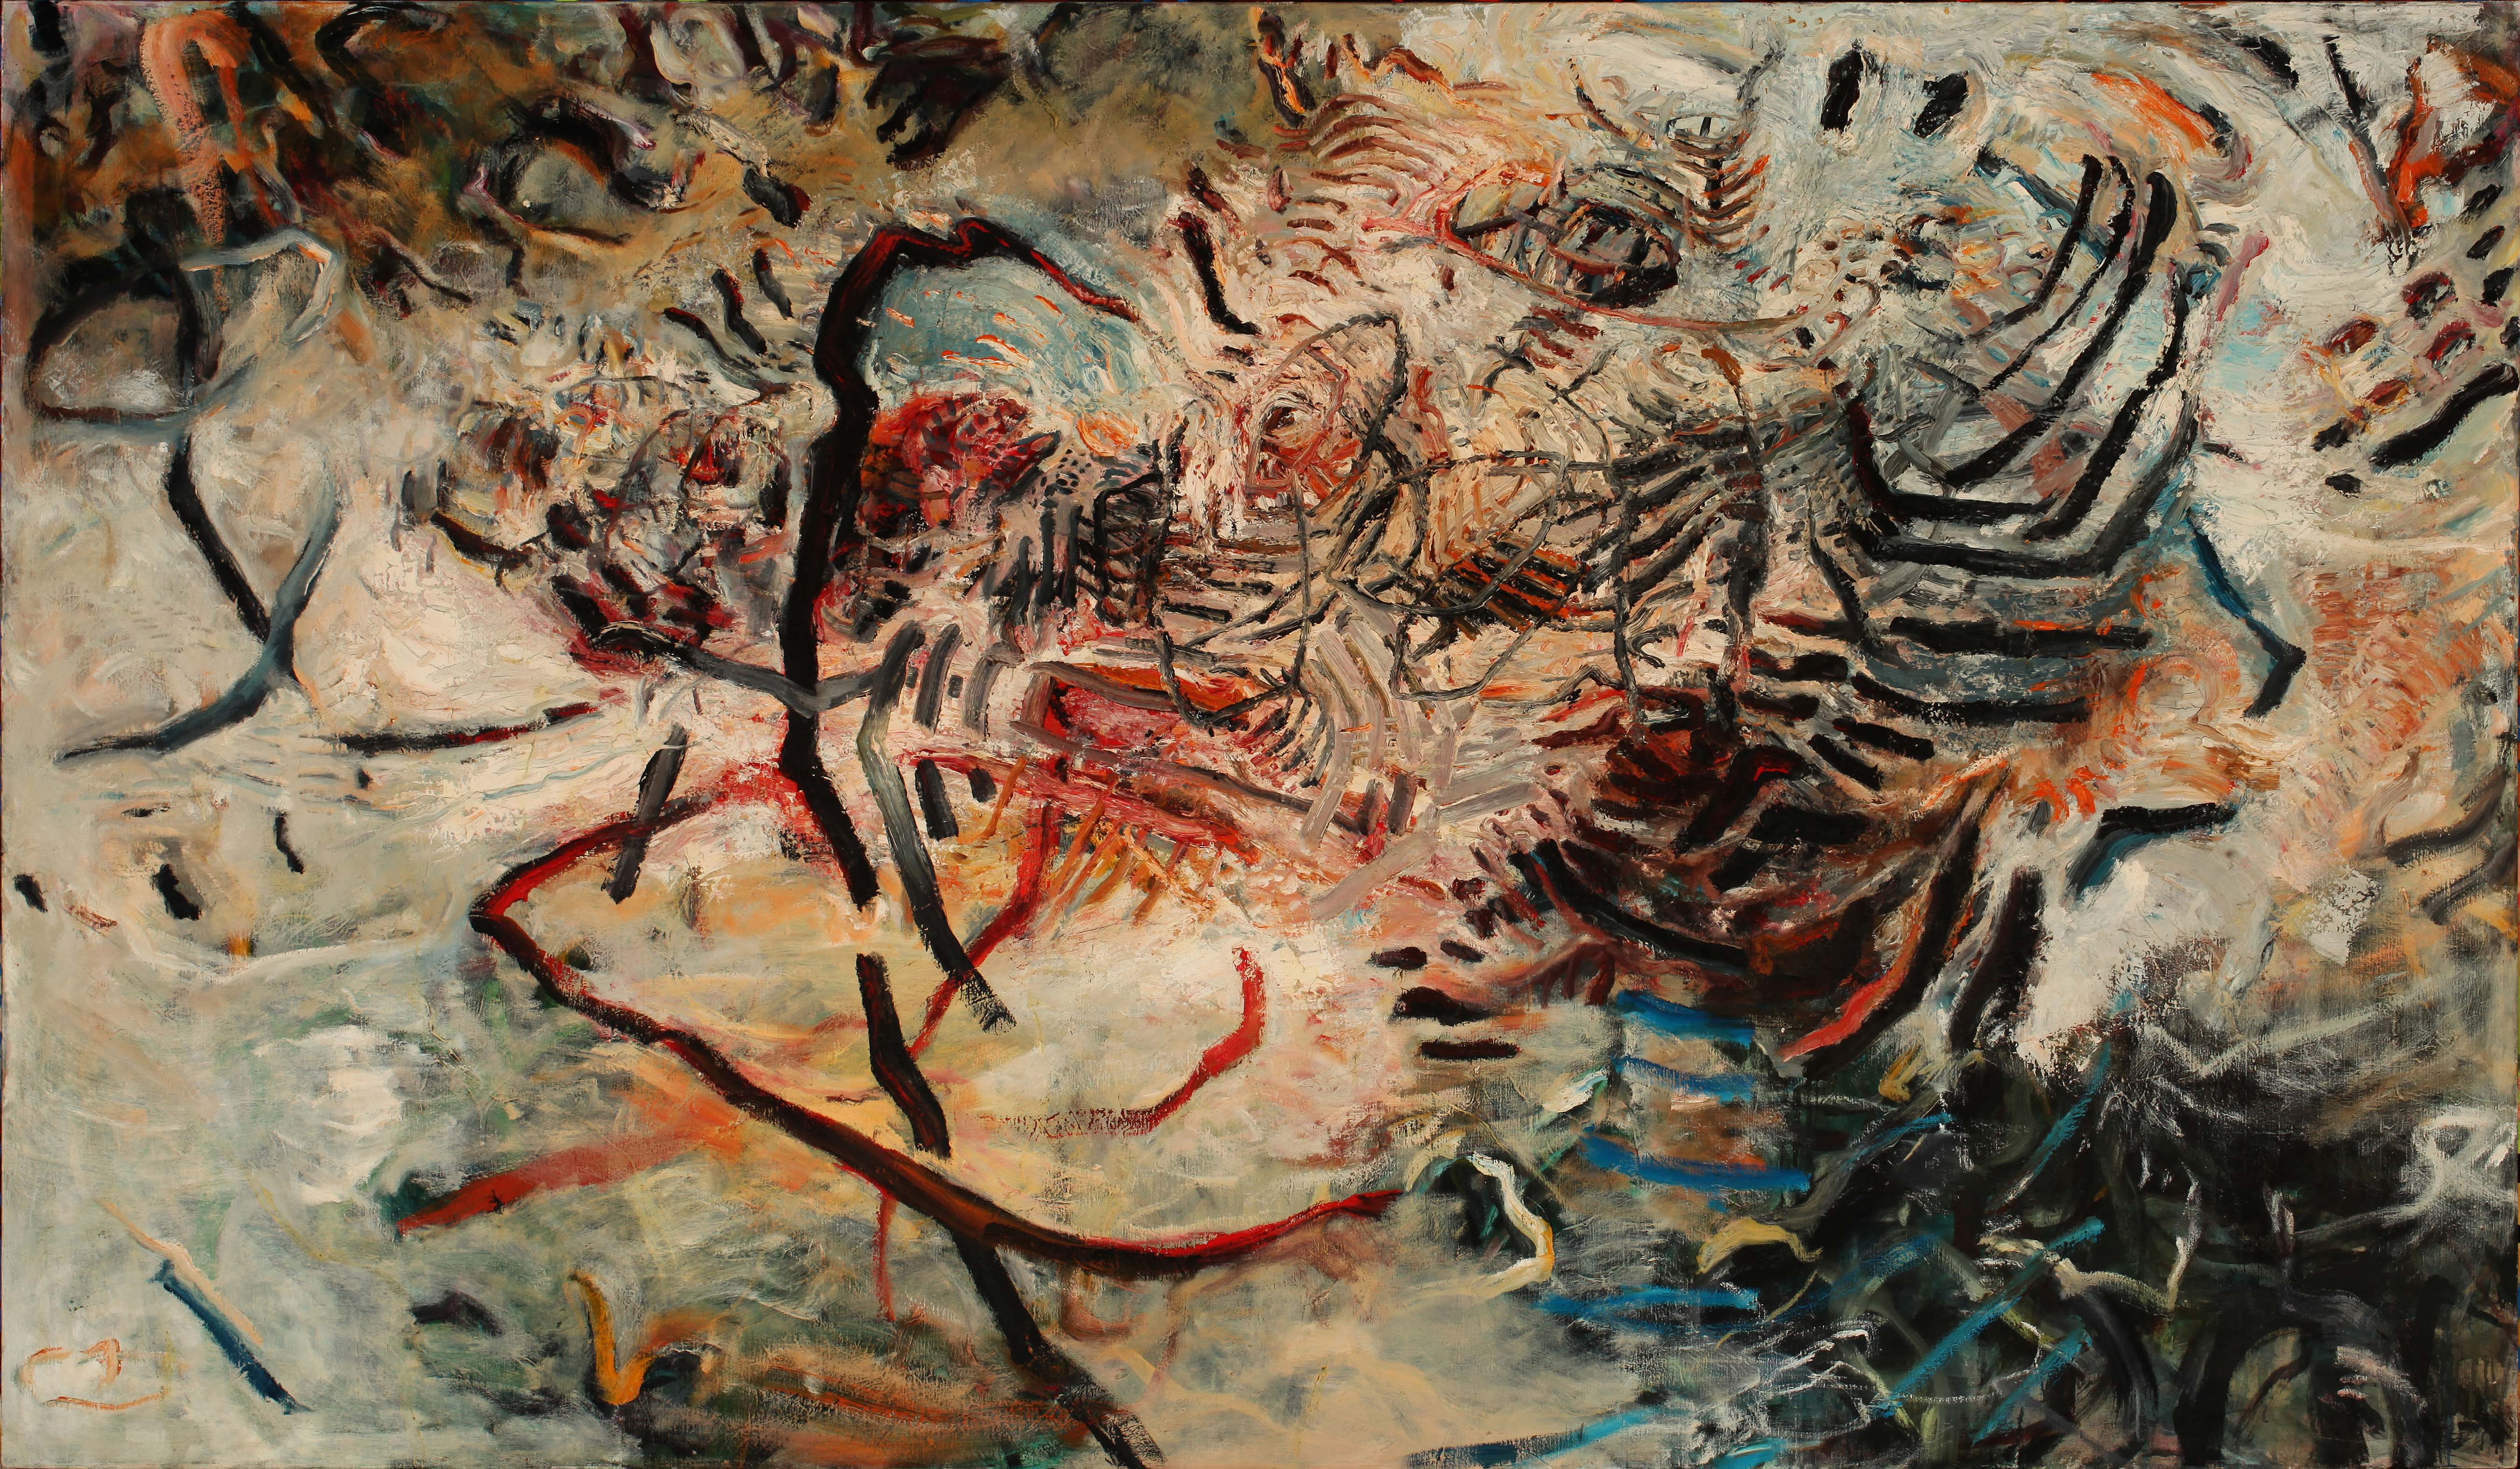 The Voices of Lotus Series XXX, 68 x 96 inches, Oil on Canvas, 1991